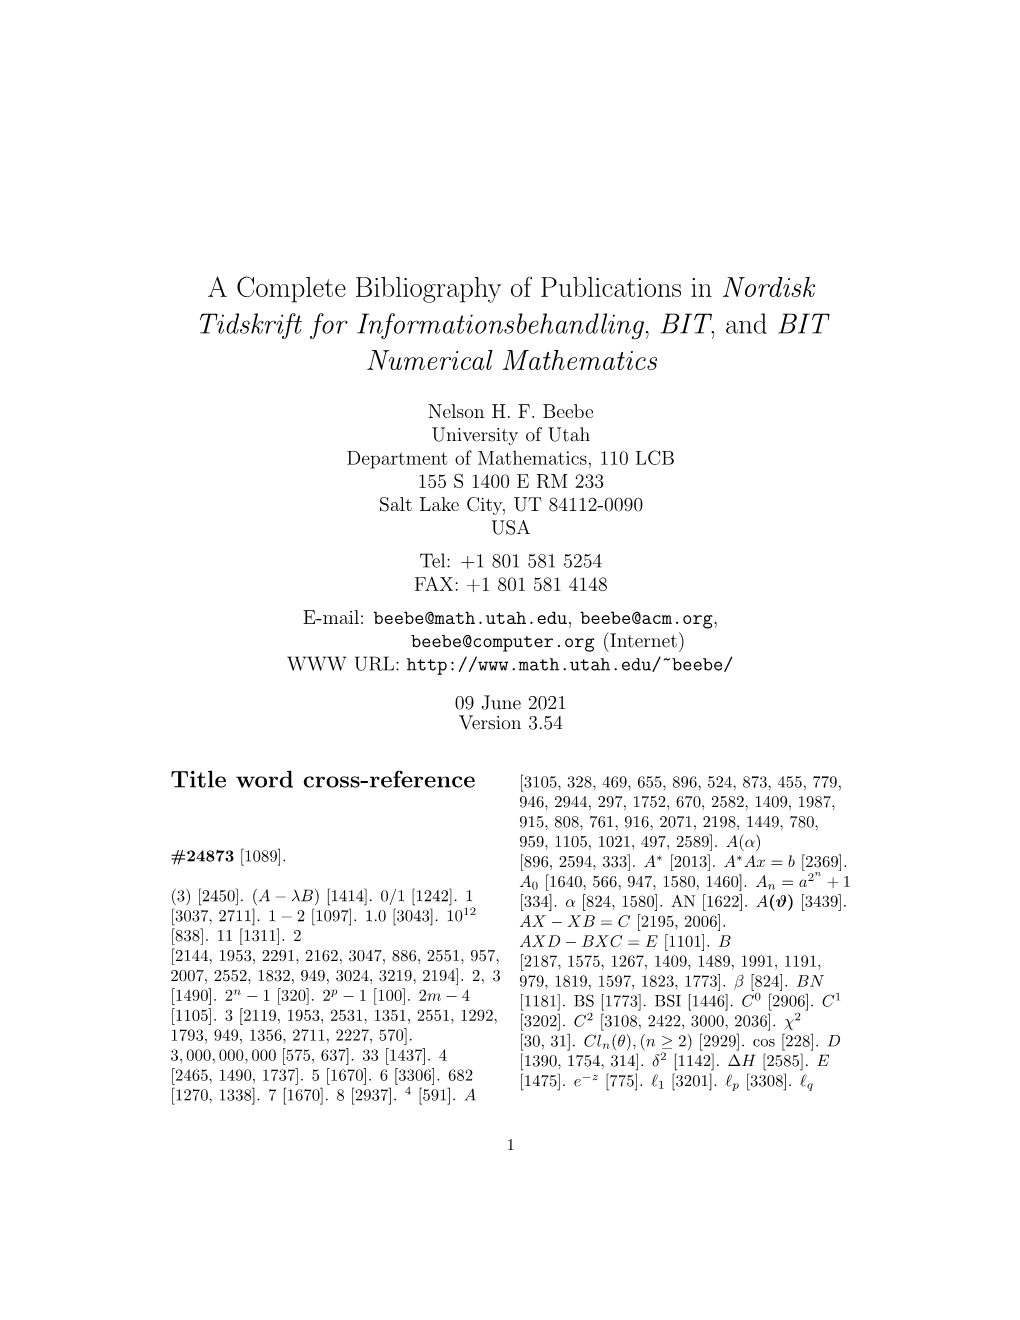 A Complete Bibliography of Publications in Nordisk Tidskrift for Informationsbehandling, BIT, and BIT Numerical Mathematics